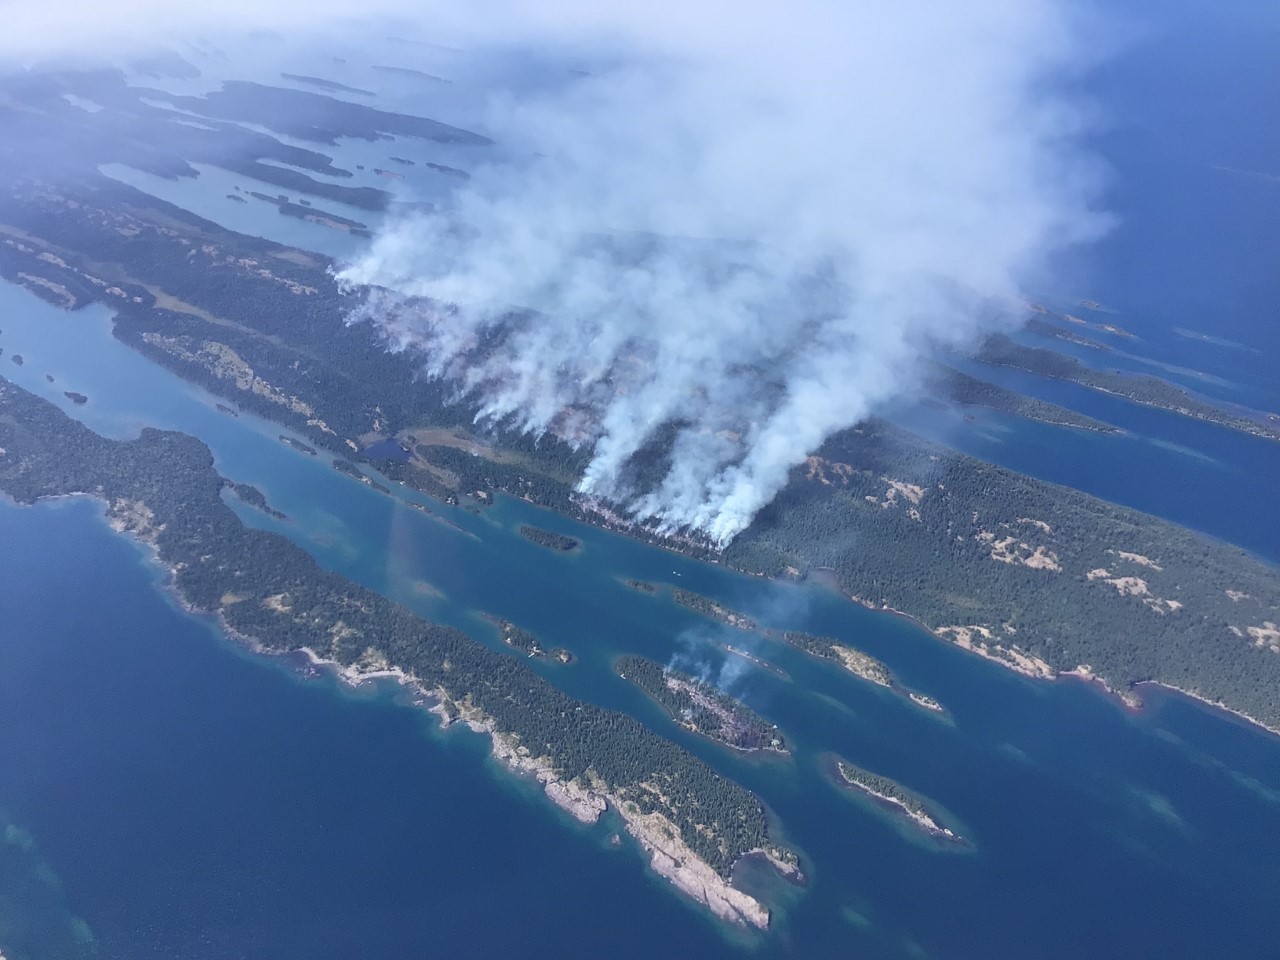 Arial view of wild fire burning on an island in a lake.